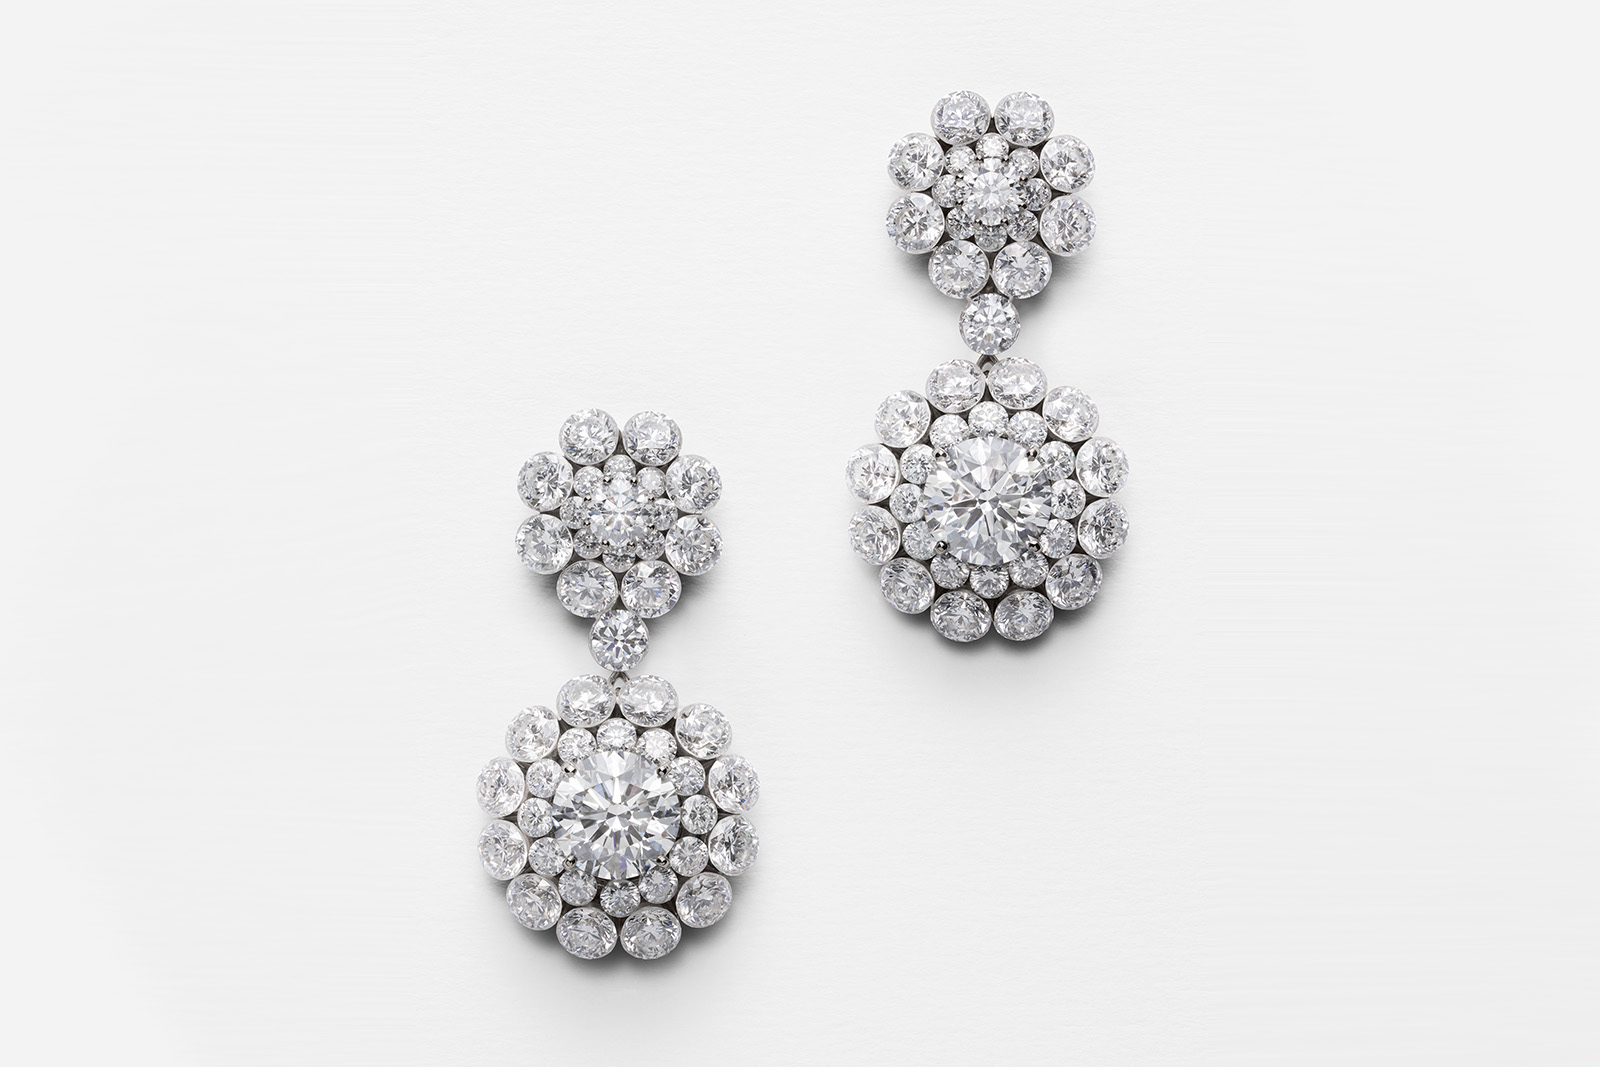 Chopard 'Magical Setting' earrings with diamonds in 18k white gold